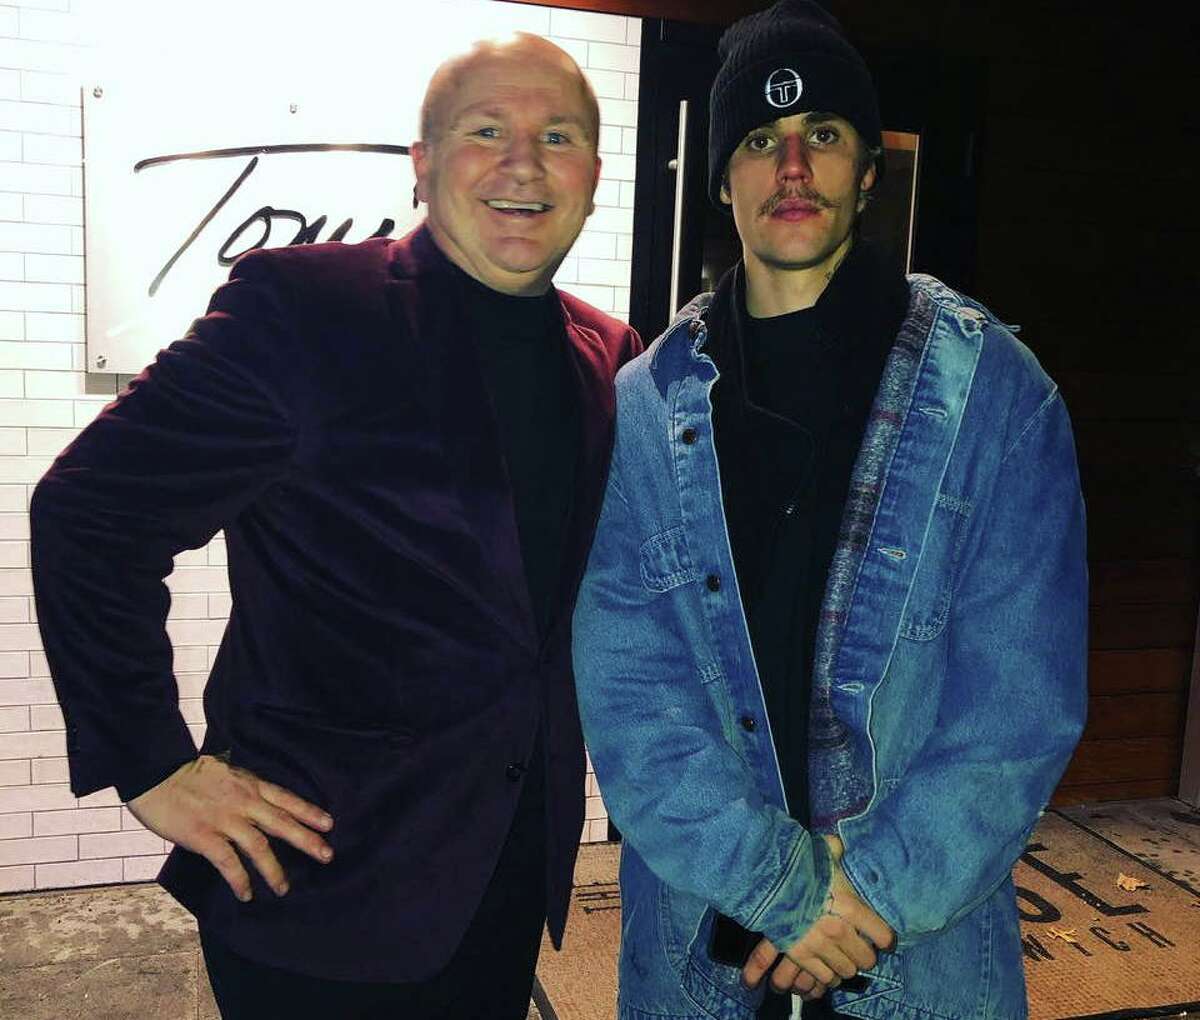 Tony Capasso of Tony’s at the JHouse in Riverside with Justin "The Biebs" Bieber.